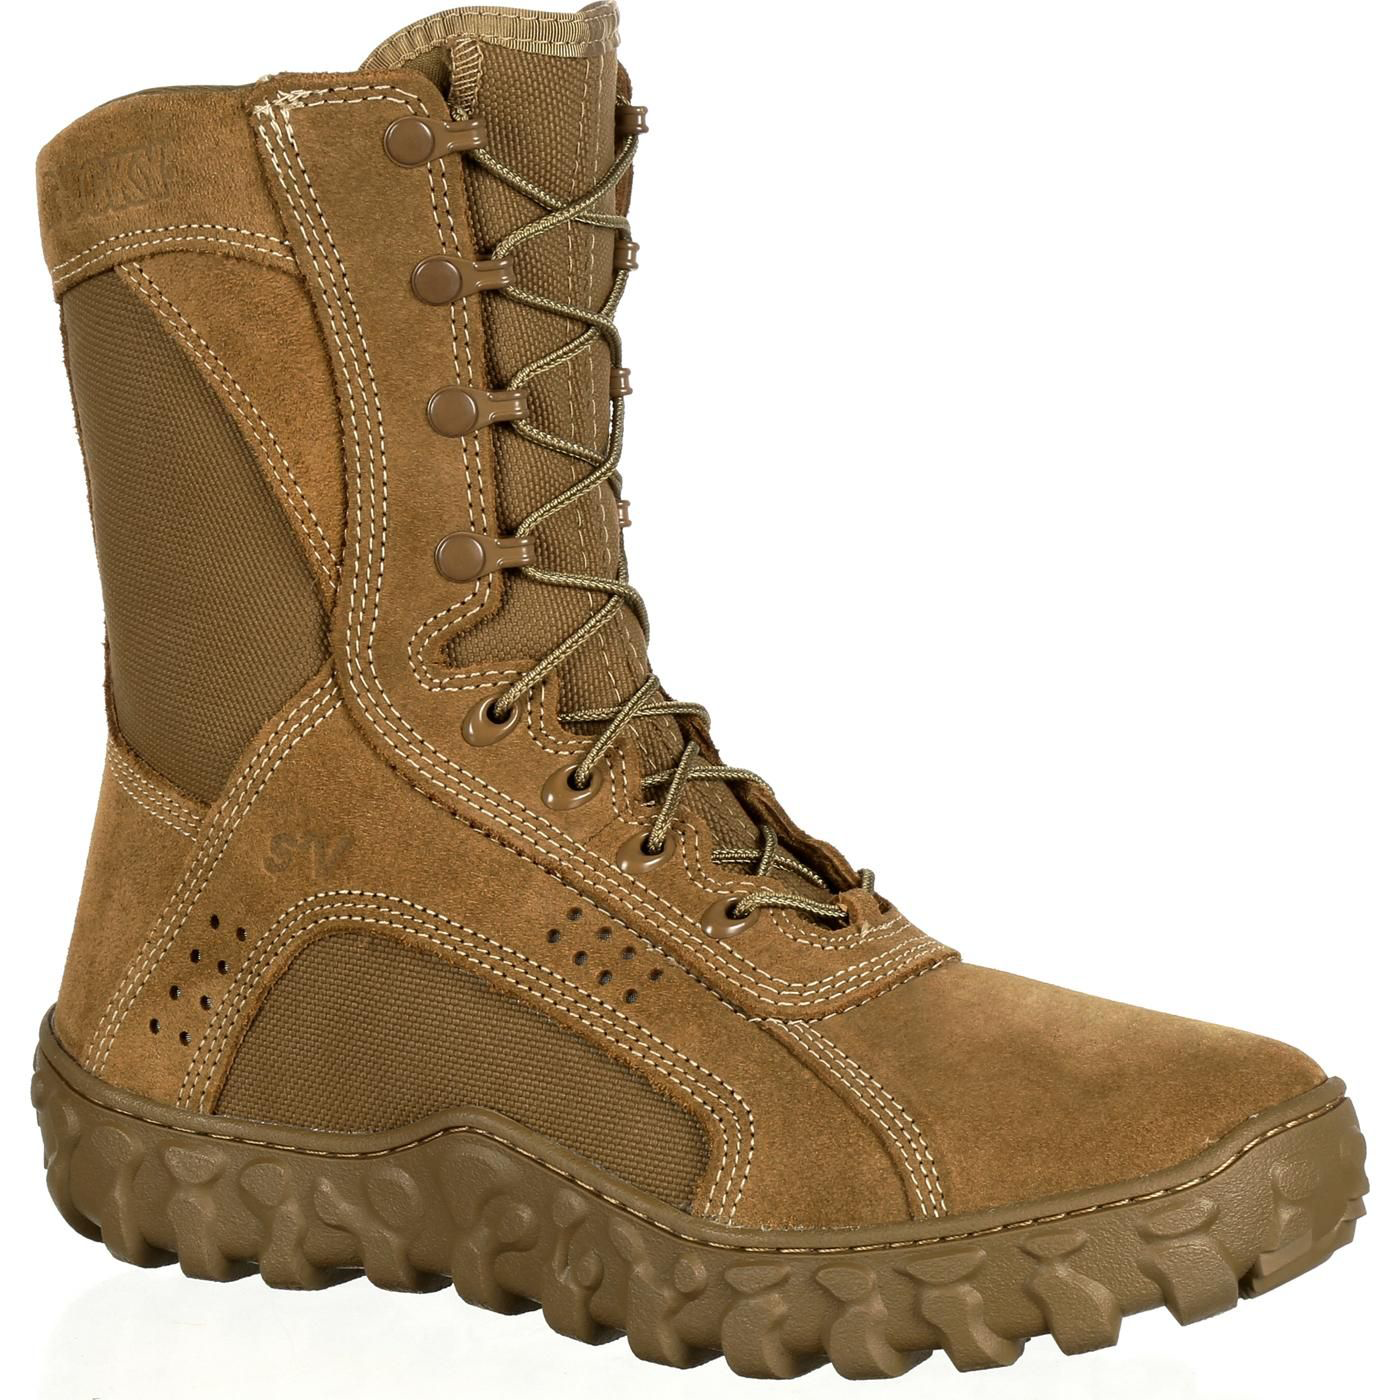 Rocky S2V Tactical Military Boots for Men - Coyote Brown - 8.5M